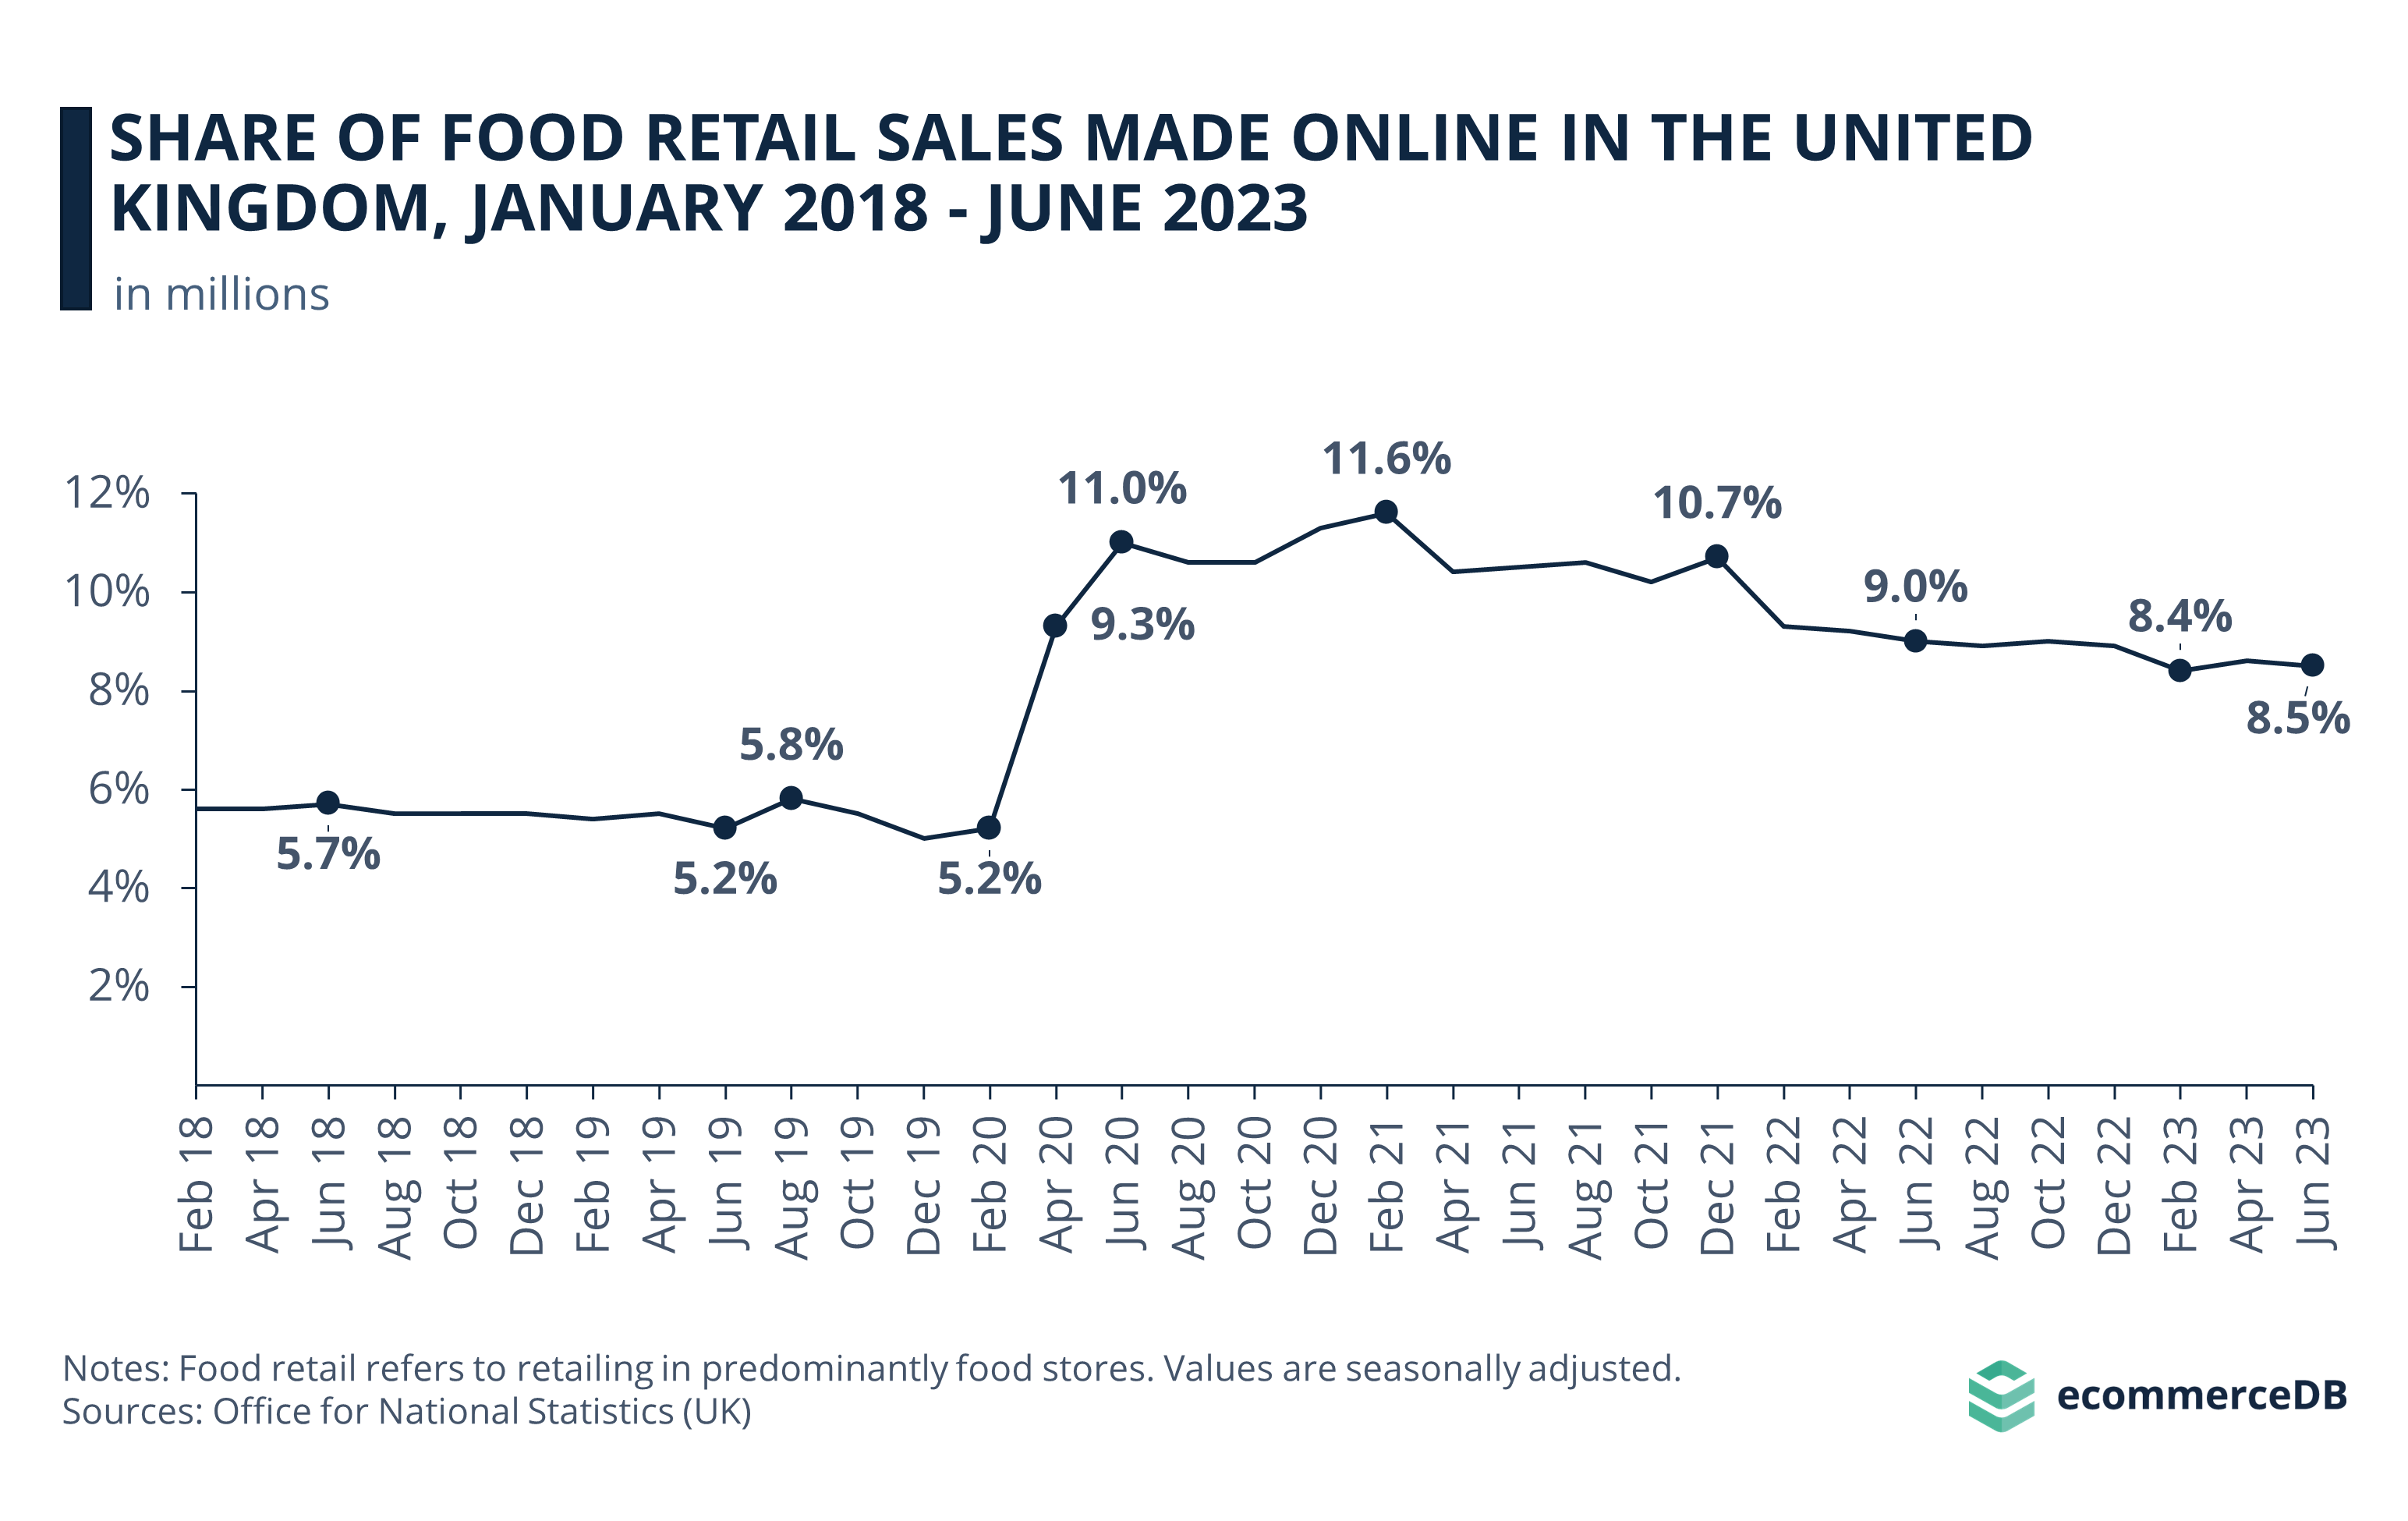 Share of Food Retail Sales Made Online in the United Kingdom, January 2018 - June 2023 